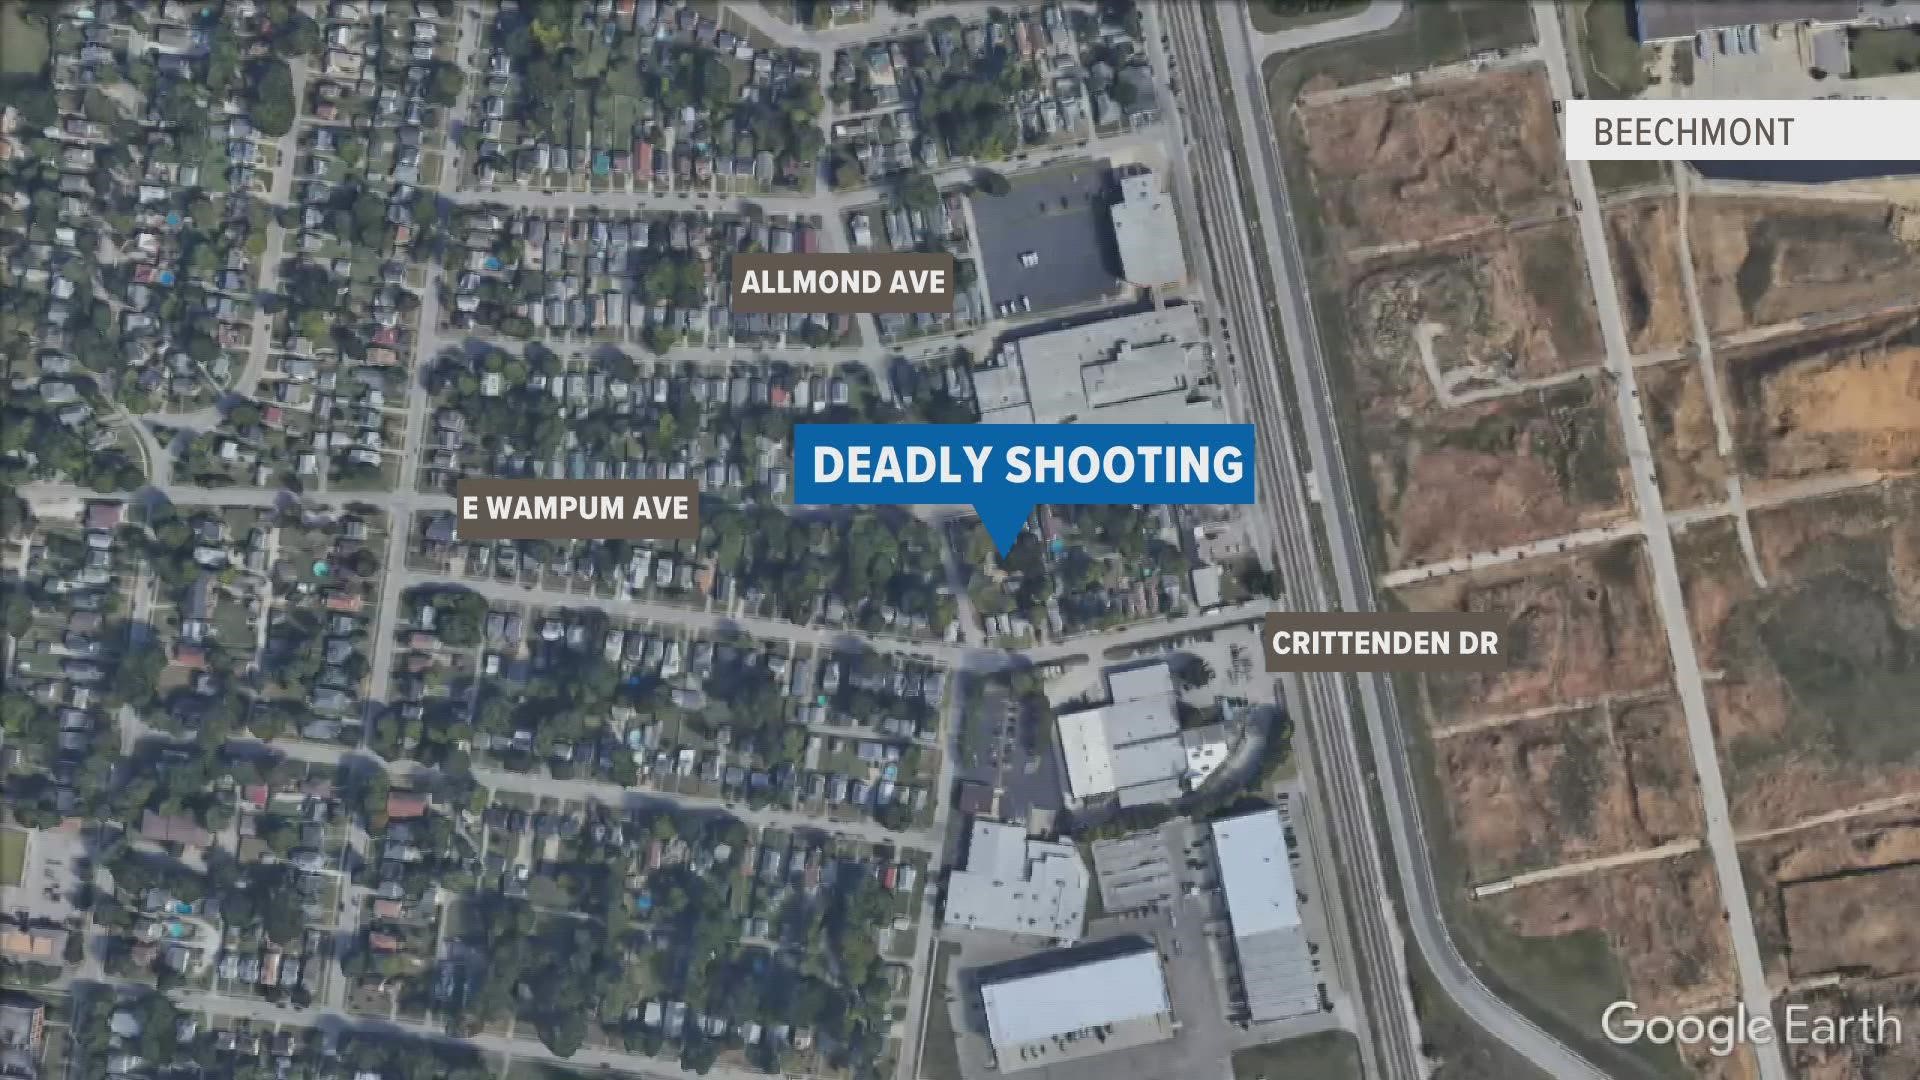 Authorities are searching for the person responsible in the shooting death of a man on East Wampum Avenue Sunday night.